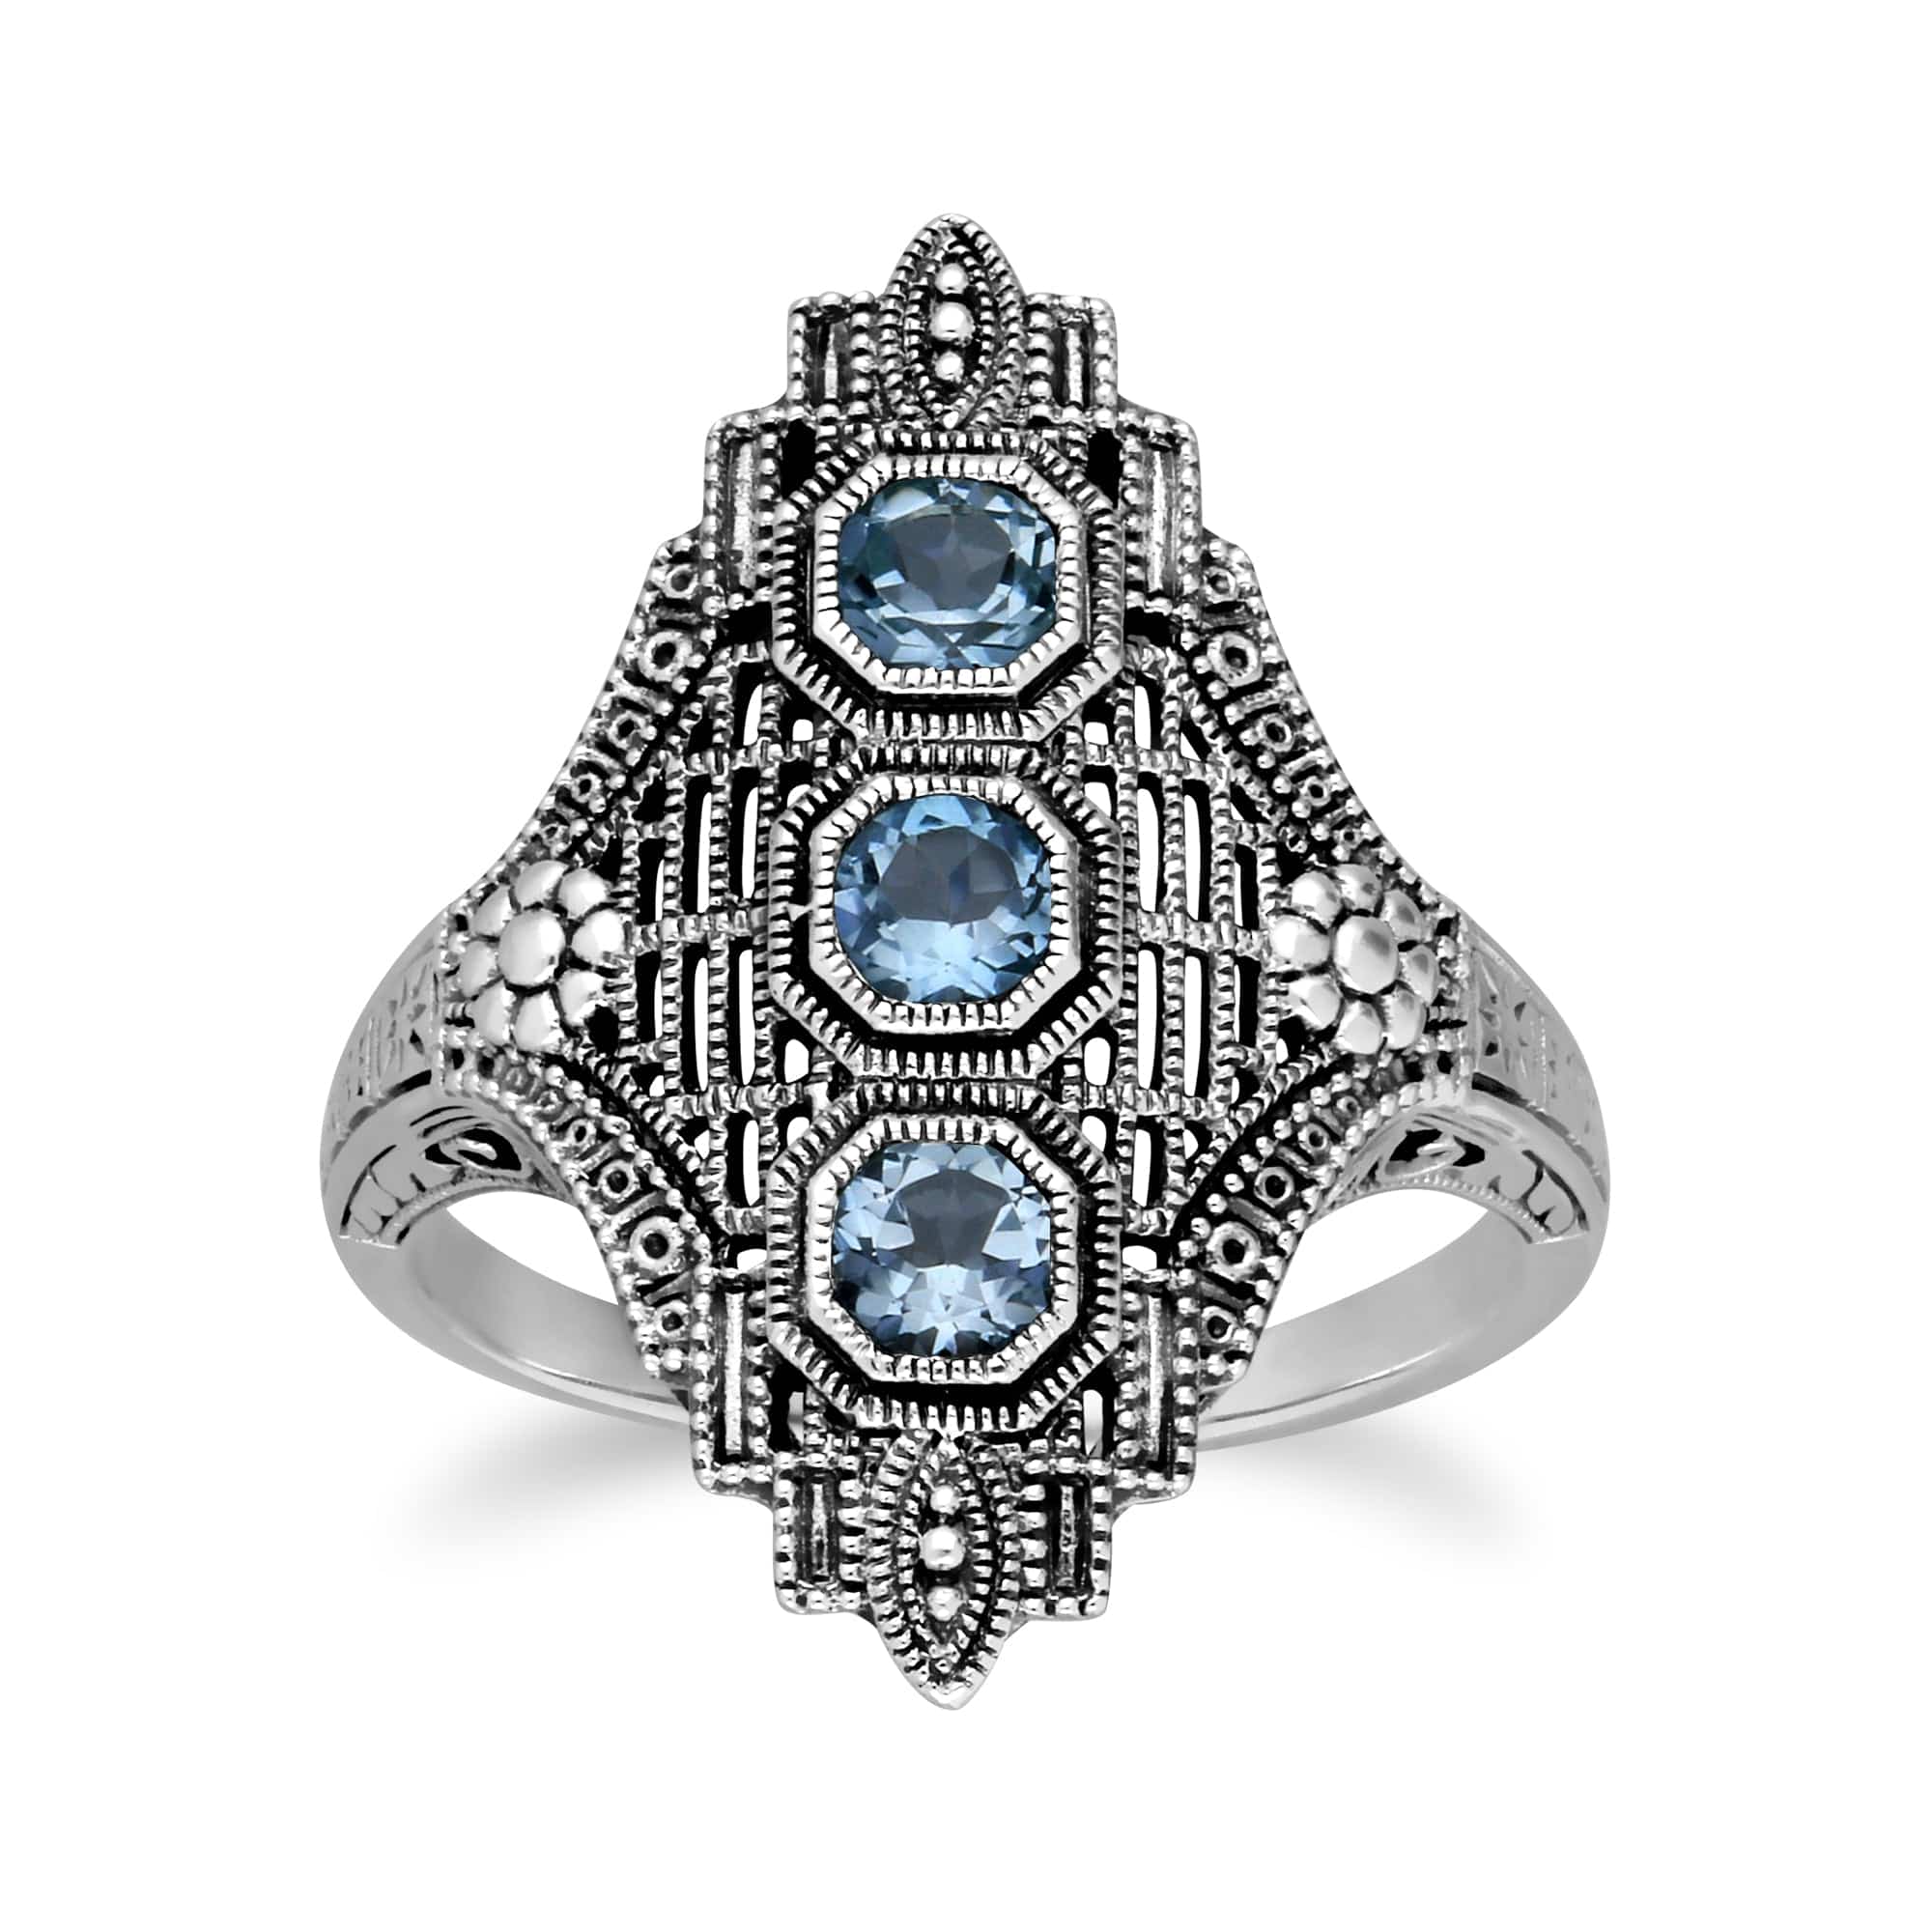 241R210503925 Art Nouveau Style Octagon Blue Topaz Three Stone Filigree Statement Ring in 925 Sterling Silver 1